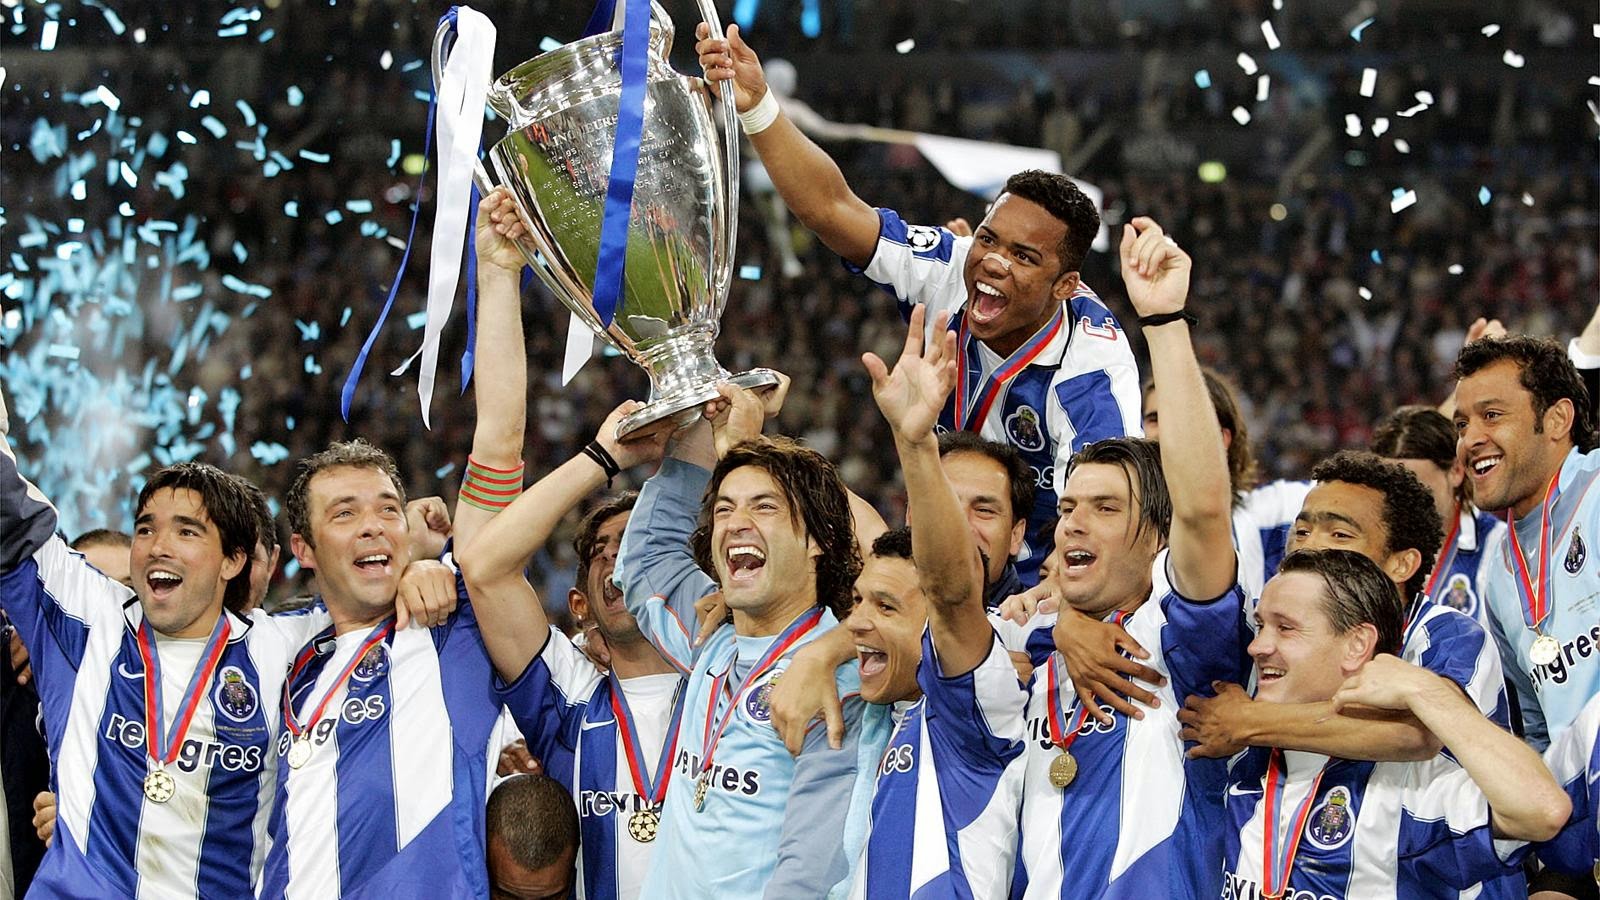 Classic European Cup Champions League Final Photo (Gallery)